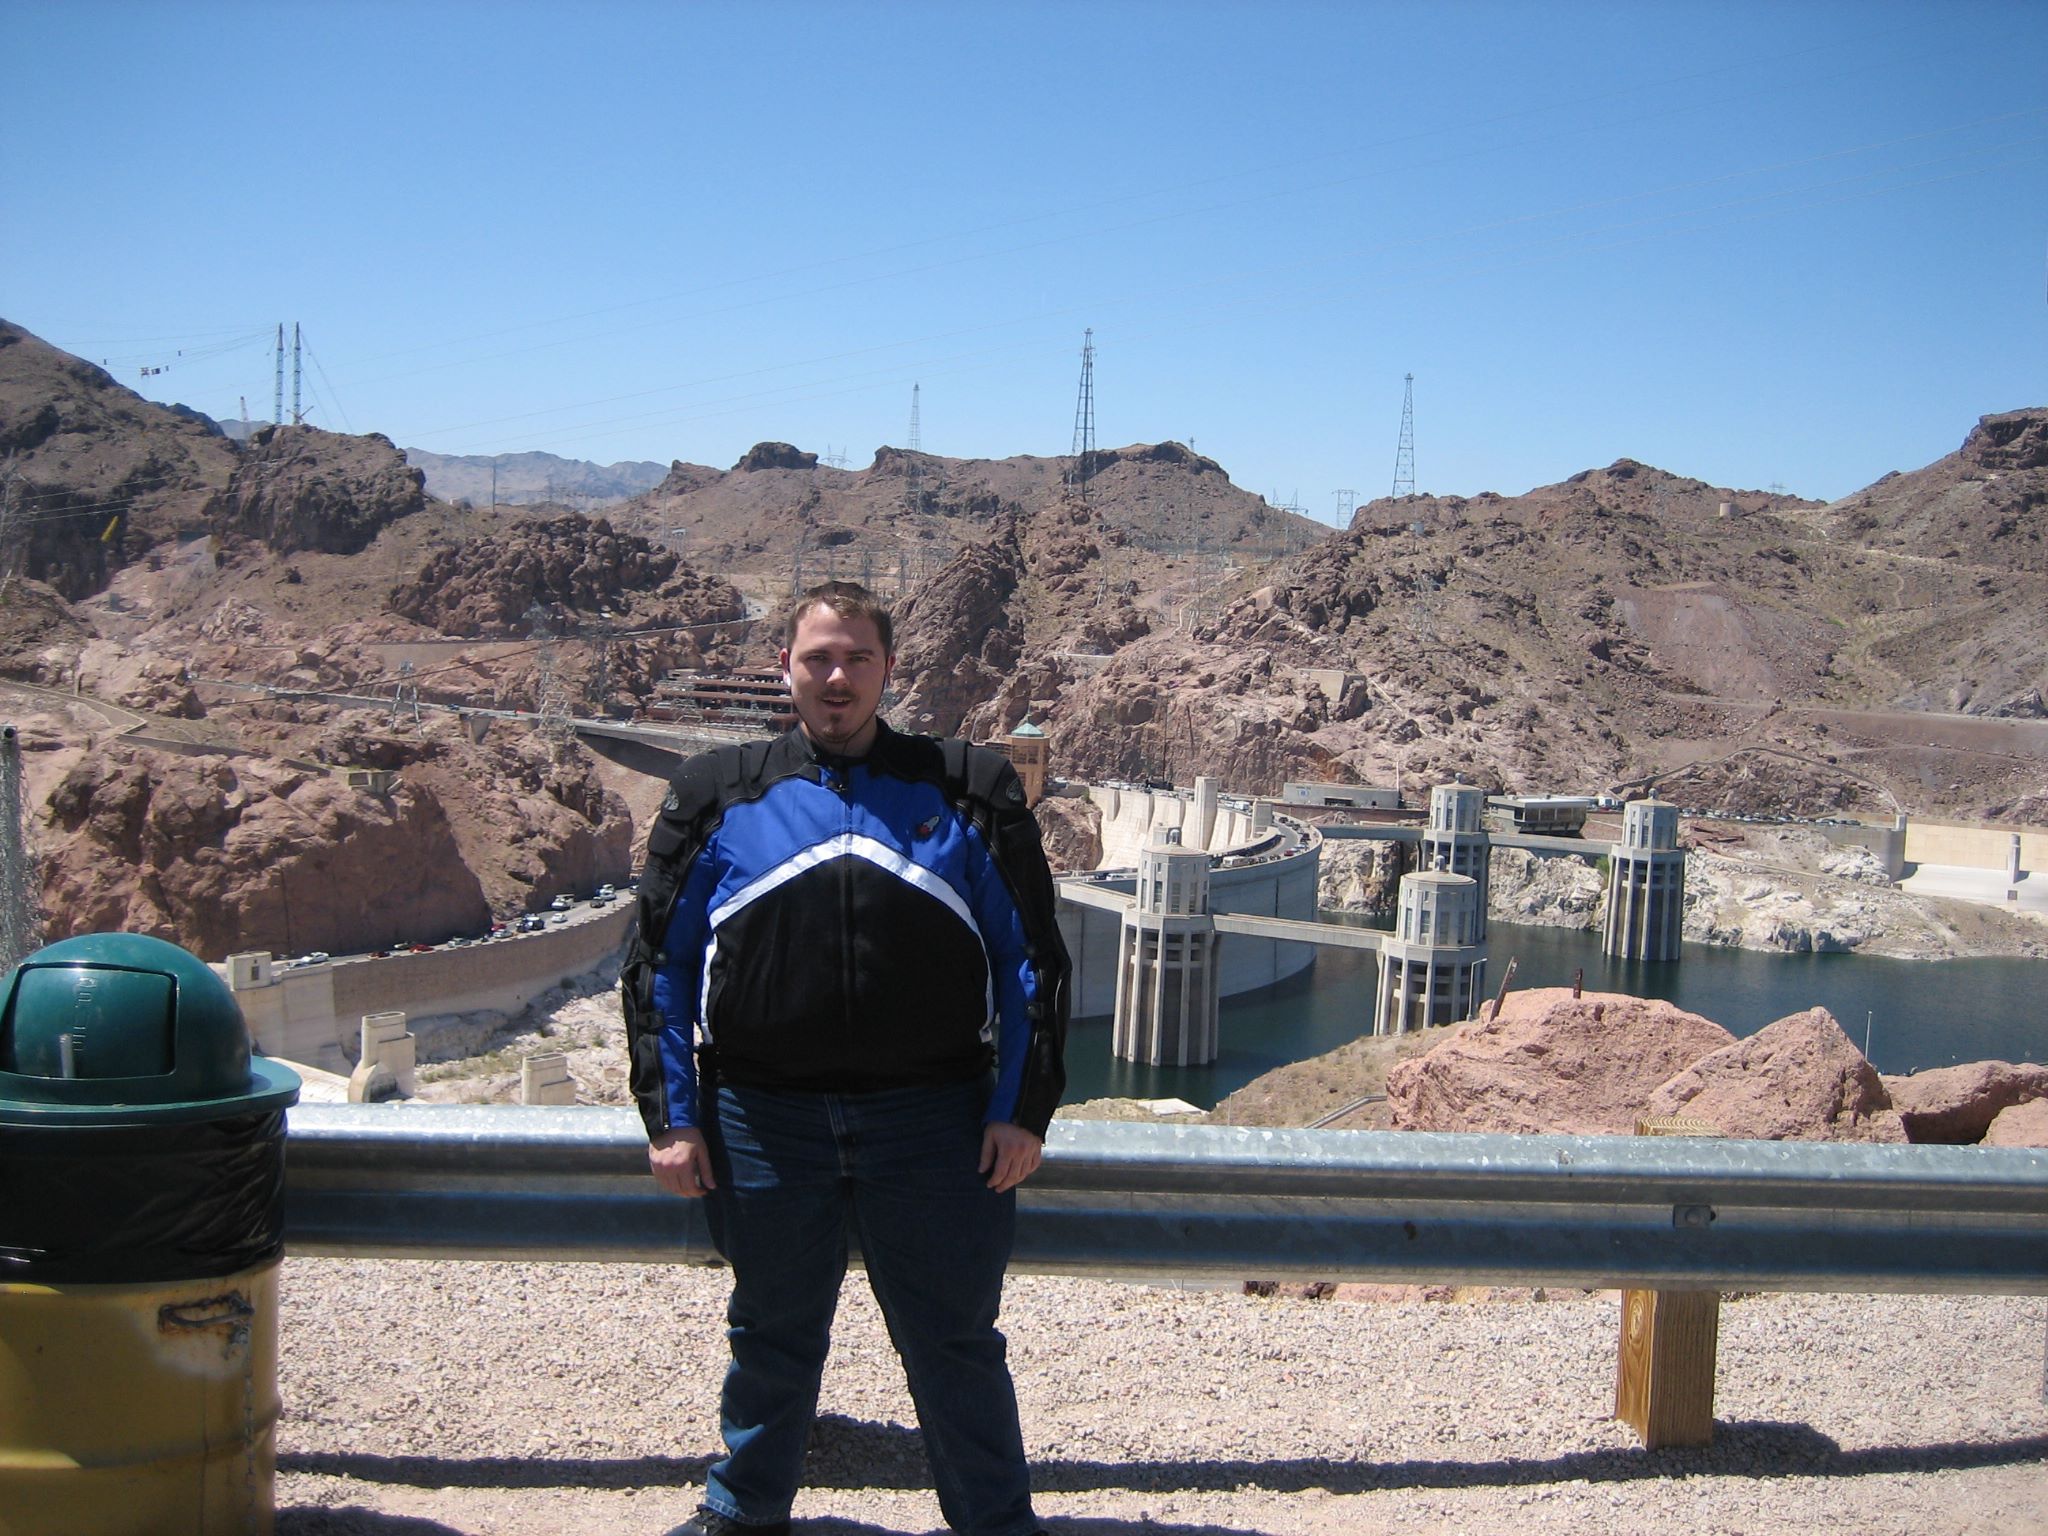 Rode my crotch rocket to the Hoover Dam